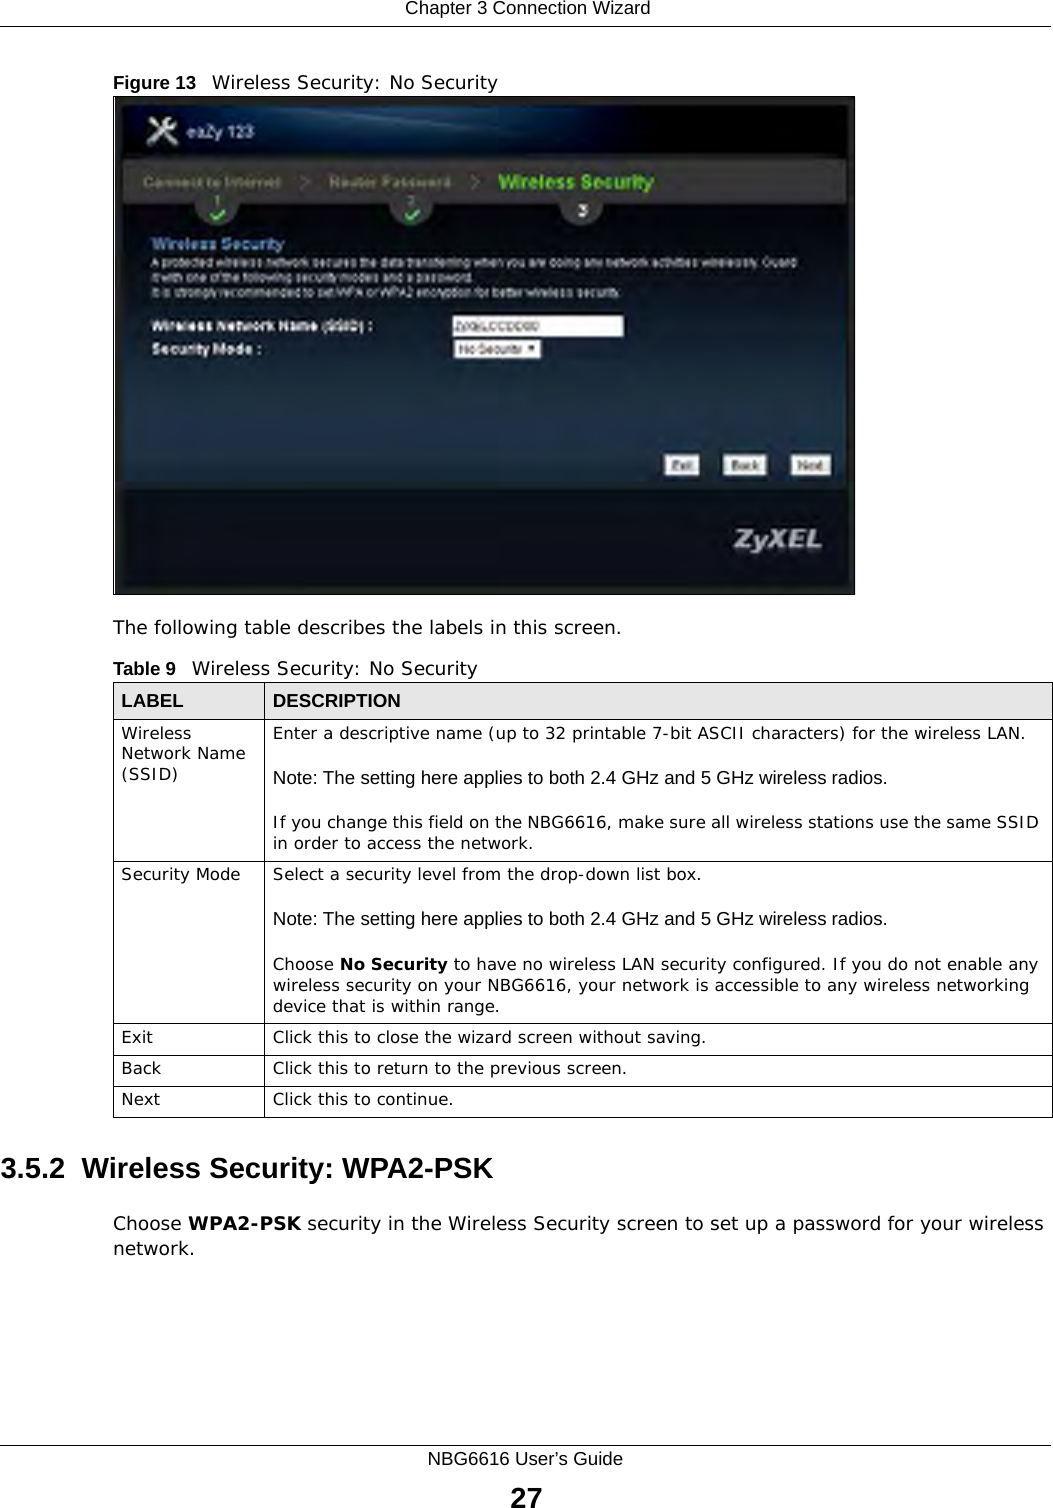  Chapter 3 Connection WizardNBG6616 User’s Guide27Figure 13   Wireless Security: No Security The following table describes the labels in this screen.3.5.2  Wireless Security: WPA2-PSKChoose WPA2-PSK security in the Wireless Security screen to set up a password for your wireless network.Table 9   Wireless Security: No SecurityLABEL DESCRIPTIONWireless Network Name (SSID)Enter a descriptive name (up to 32 printable 7-bit ASCII characters) for the wireless LAN. Note: The setting here applies to both 2.4 GHz and 5 GHz wireless radios.If you change this field on the NBG6616, make sure all wireless stations use the same SSID in order to access the network. Security Mode Select a security level from the drop-down list box. Note: The setting here applies to both 2.4 GHz and 5 GHz wireless radios.Choose No Security to have no wireless LAN security configured. If you do not enable any wireless security on your NBG6616, your network is accessible to any wireless networking device that is within range. Exit Click this to close the wizard screen without saving.Back Click this to return to the previous screen.Next Click this to continue. 